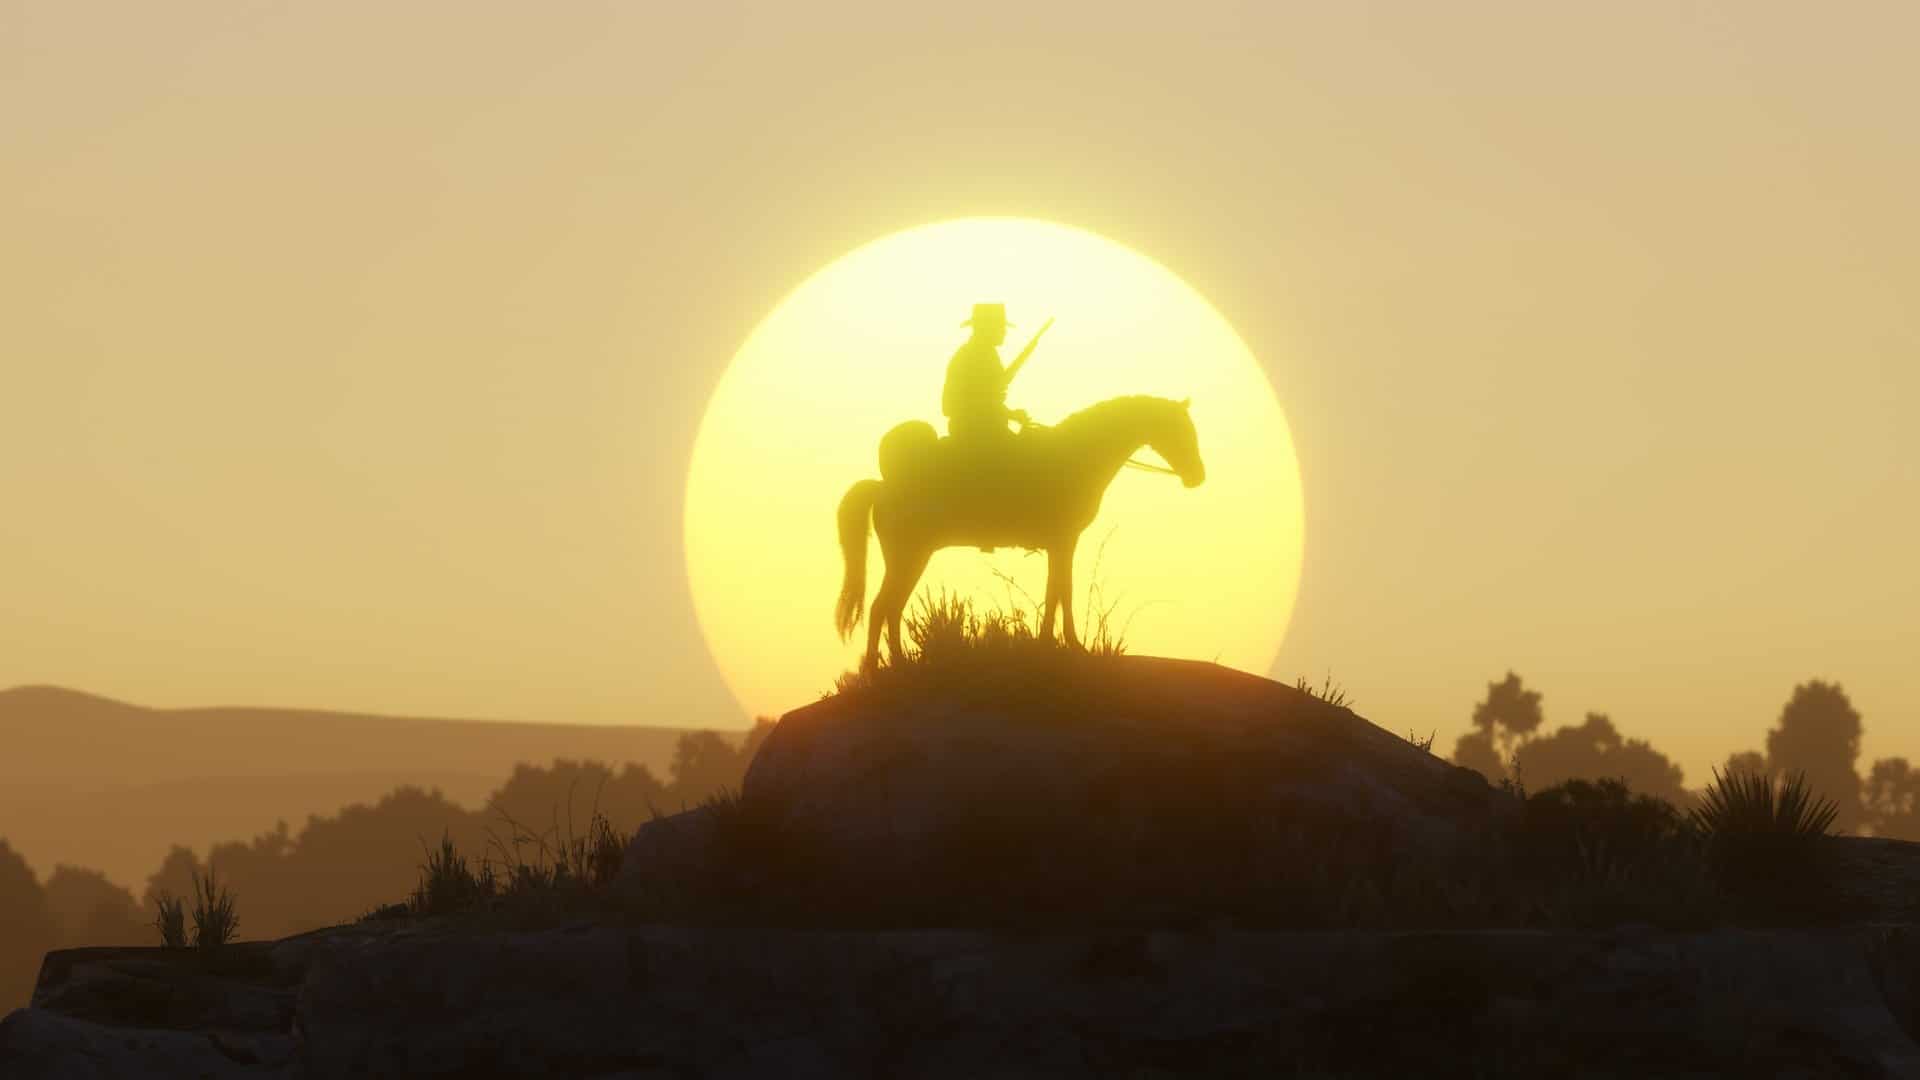 Man on horse with sun setting in background from Red Dead Redemption 2.